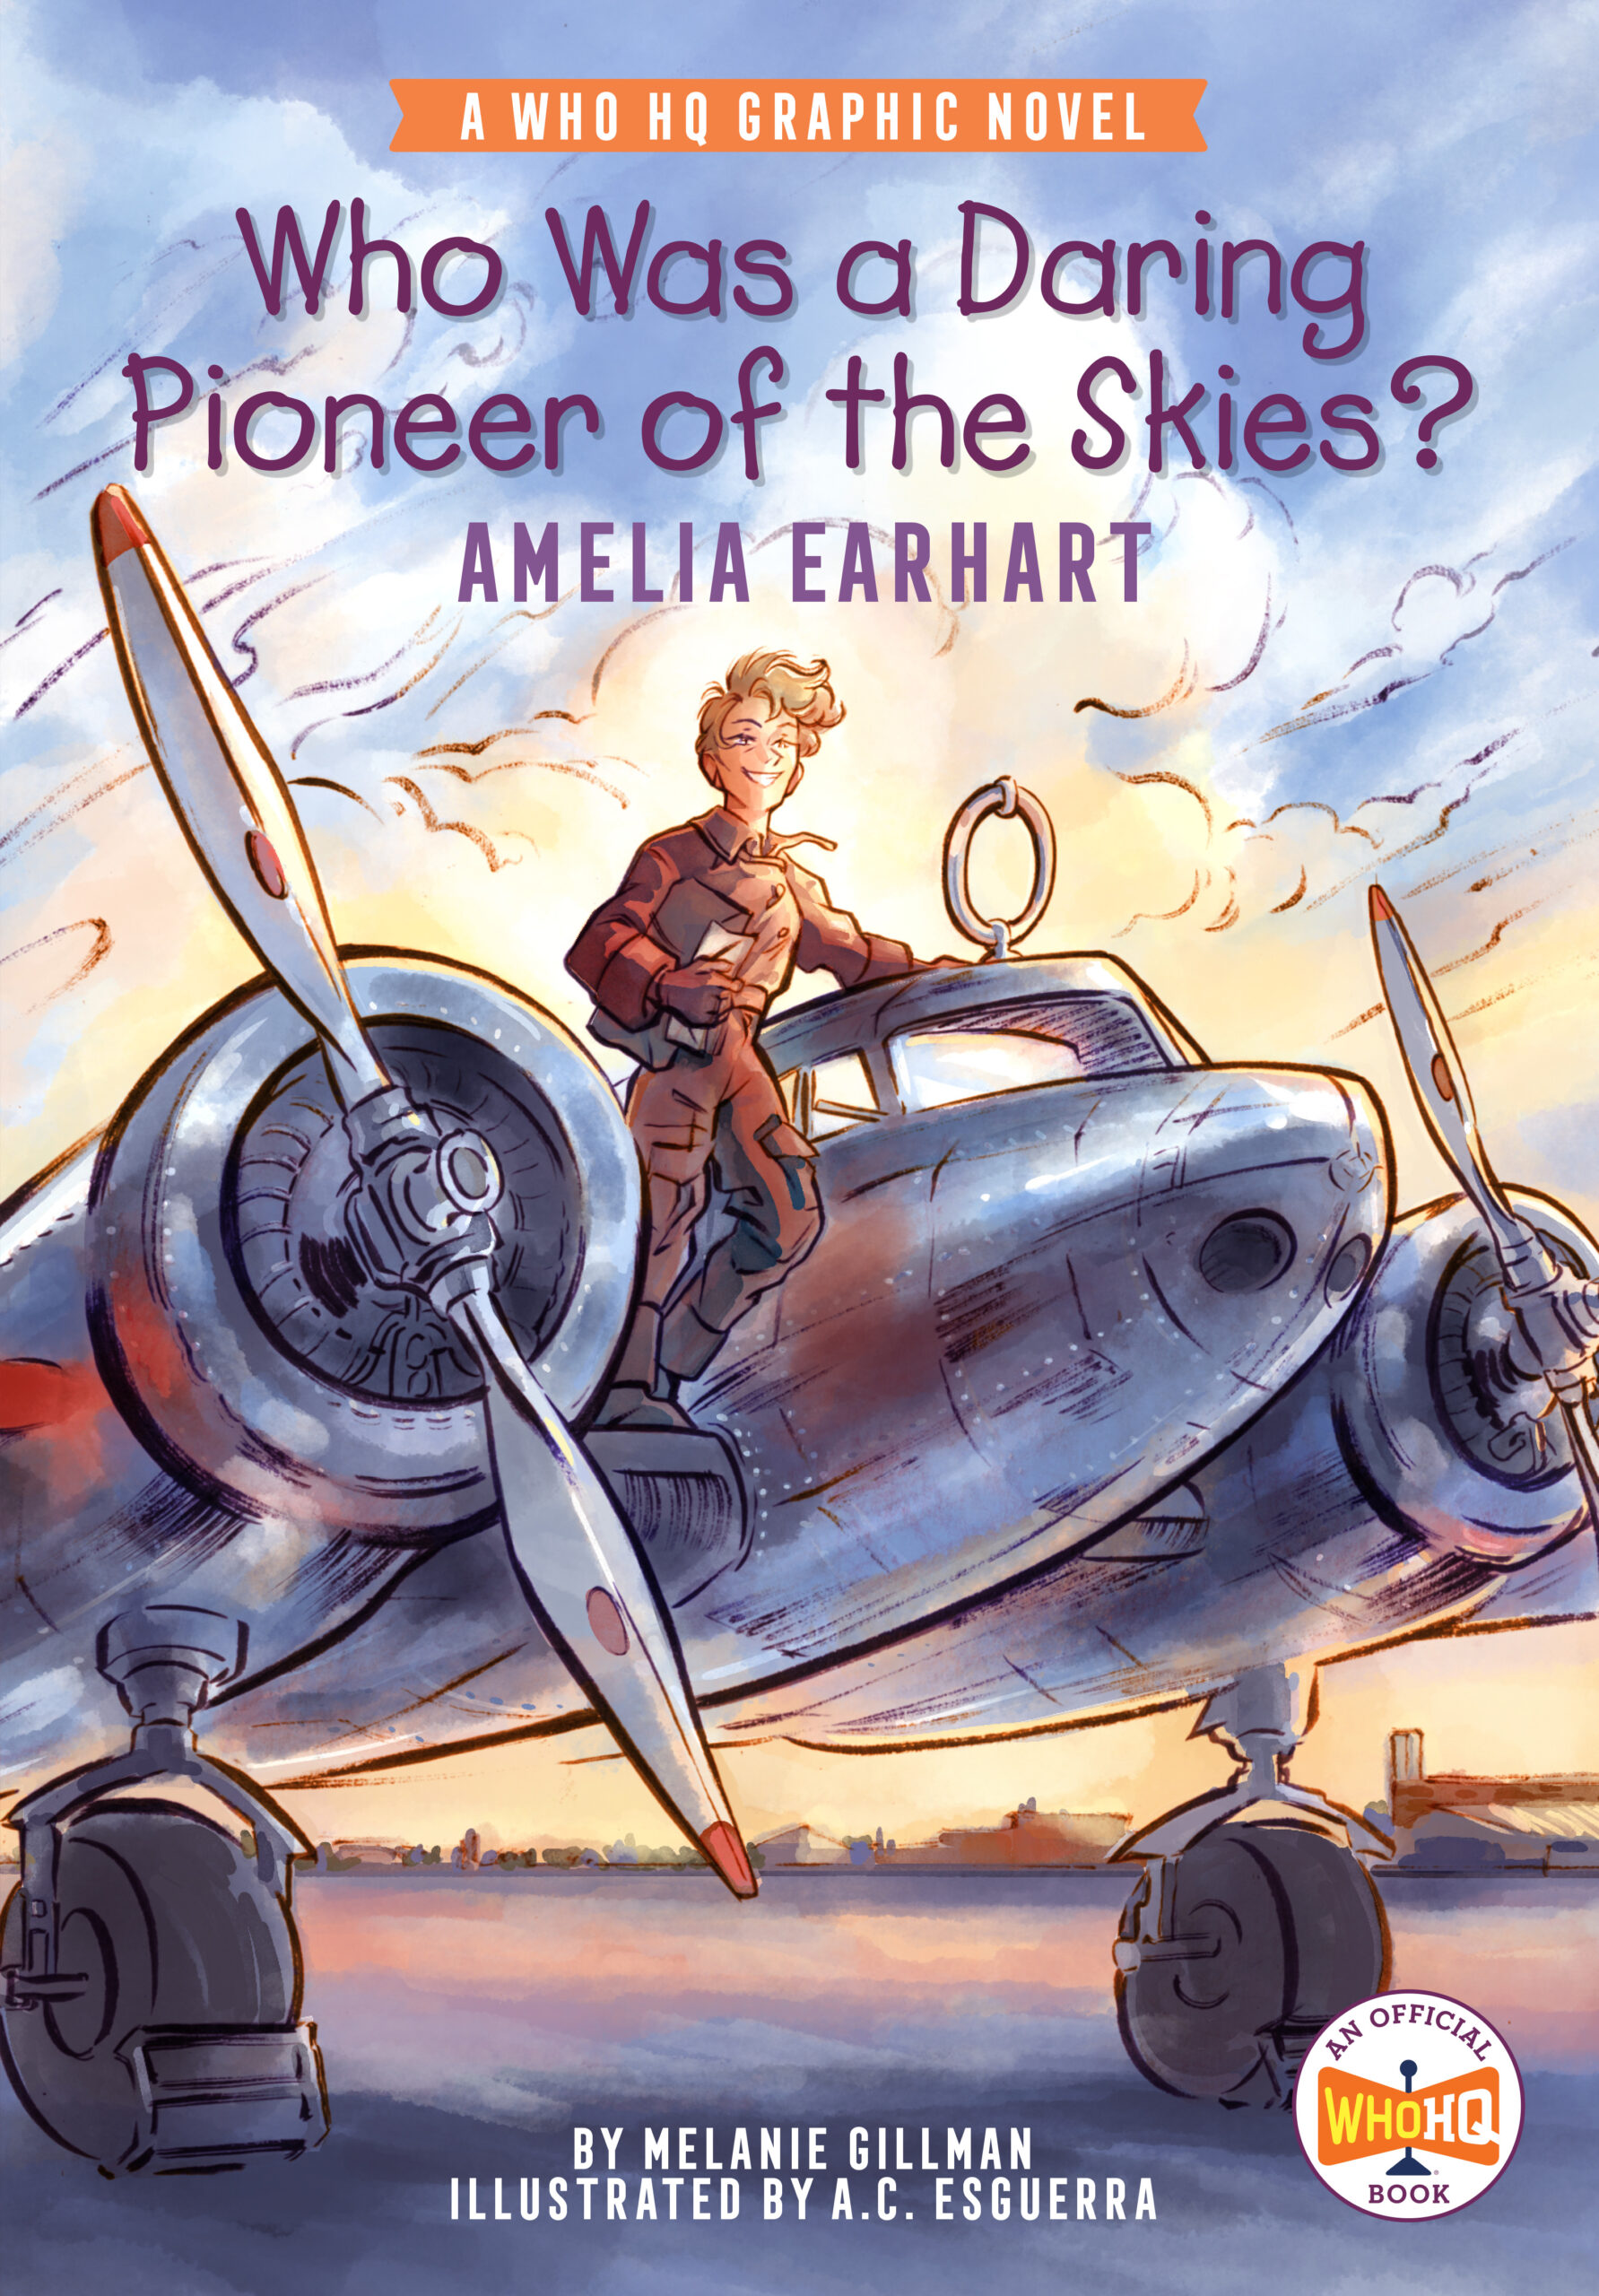 Most Surprising Things We Learned While Drawing Amelia Earhart, a guest post by Melanie Gillman and A.C. Esguerra